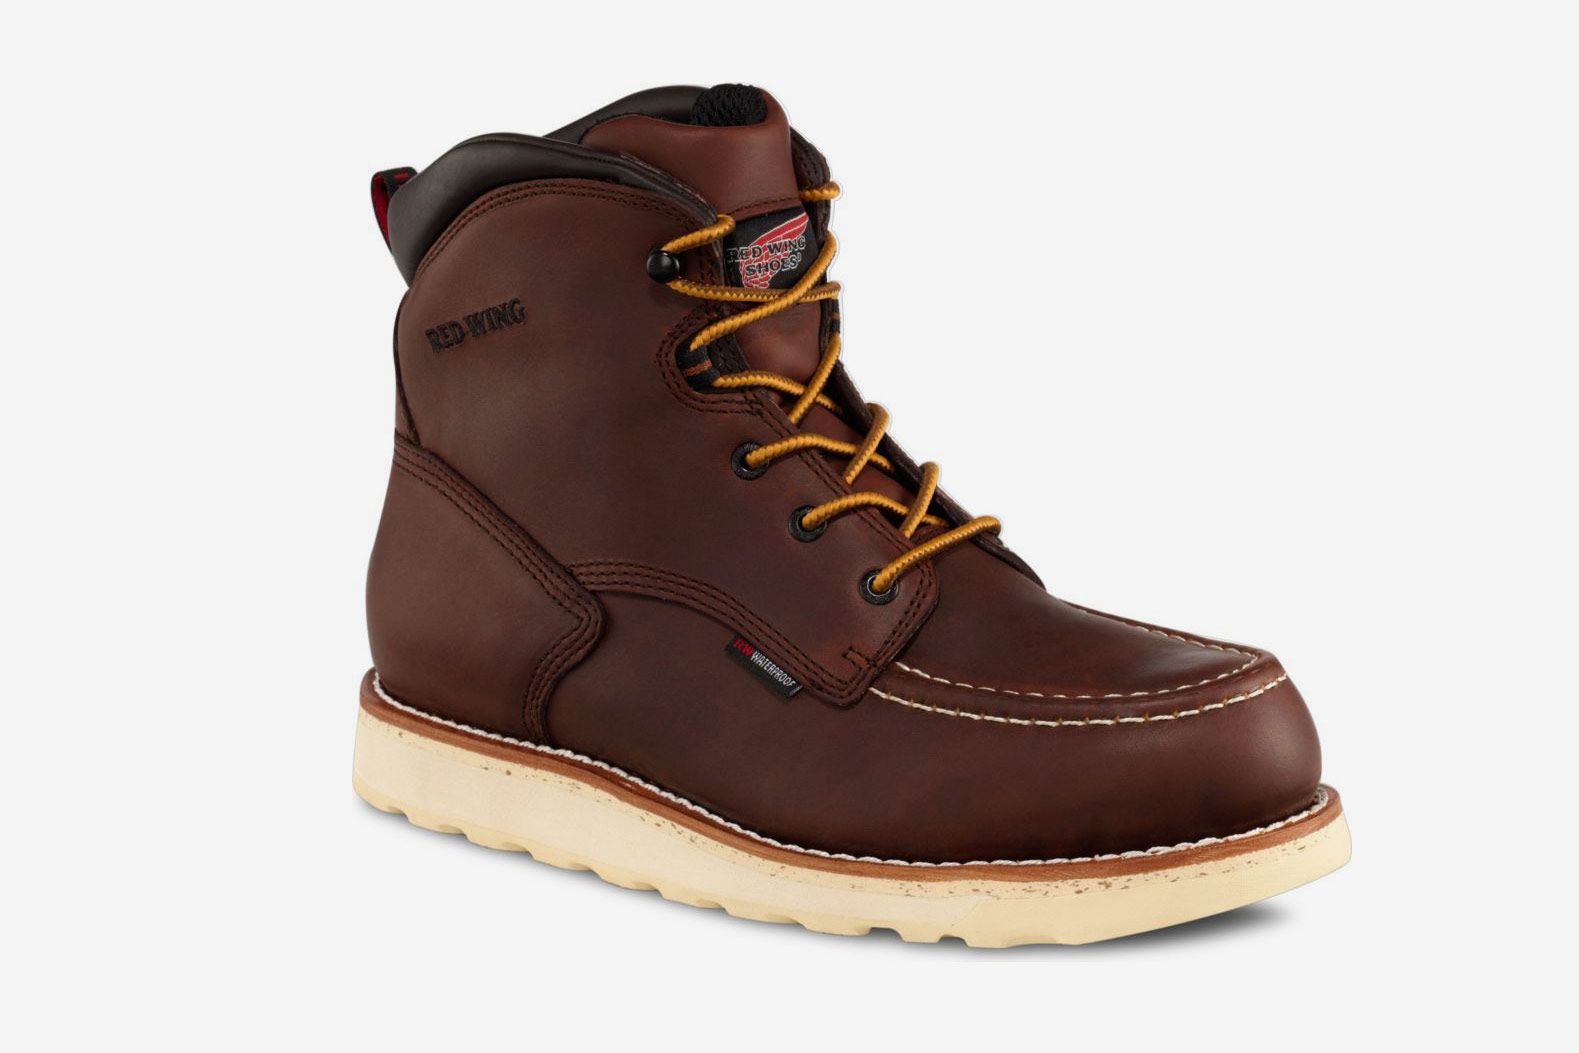 New Red Wing Work Boots | vlr.eng.br